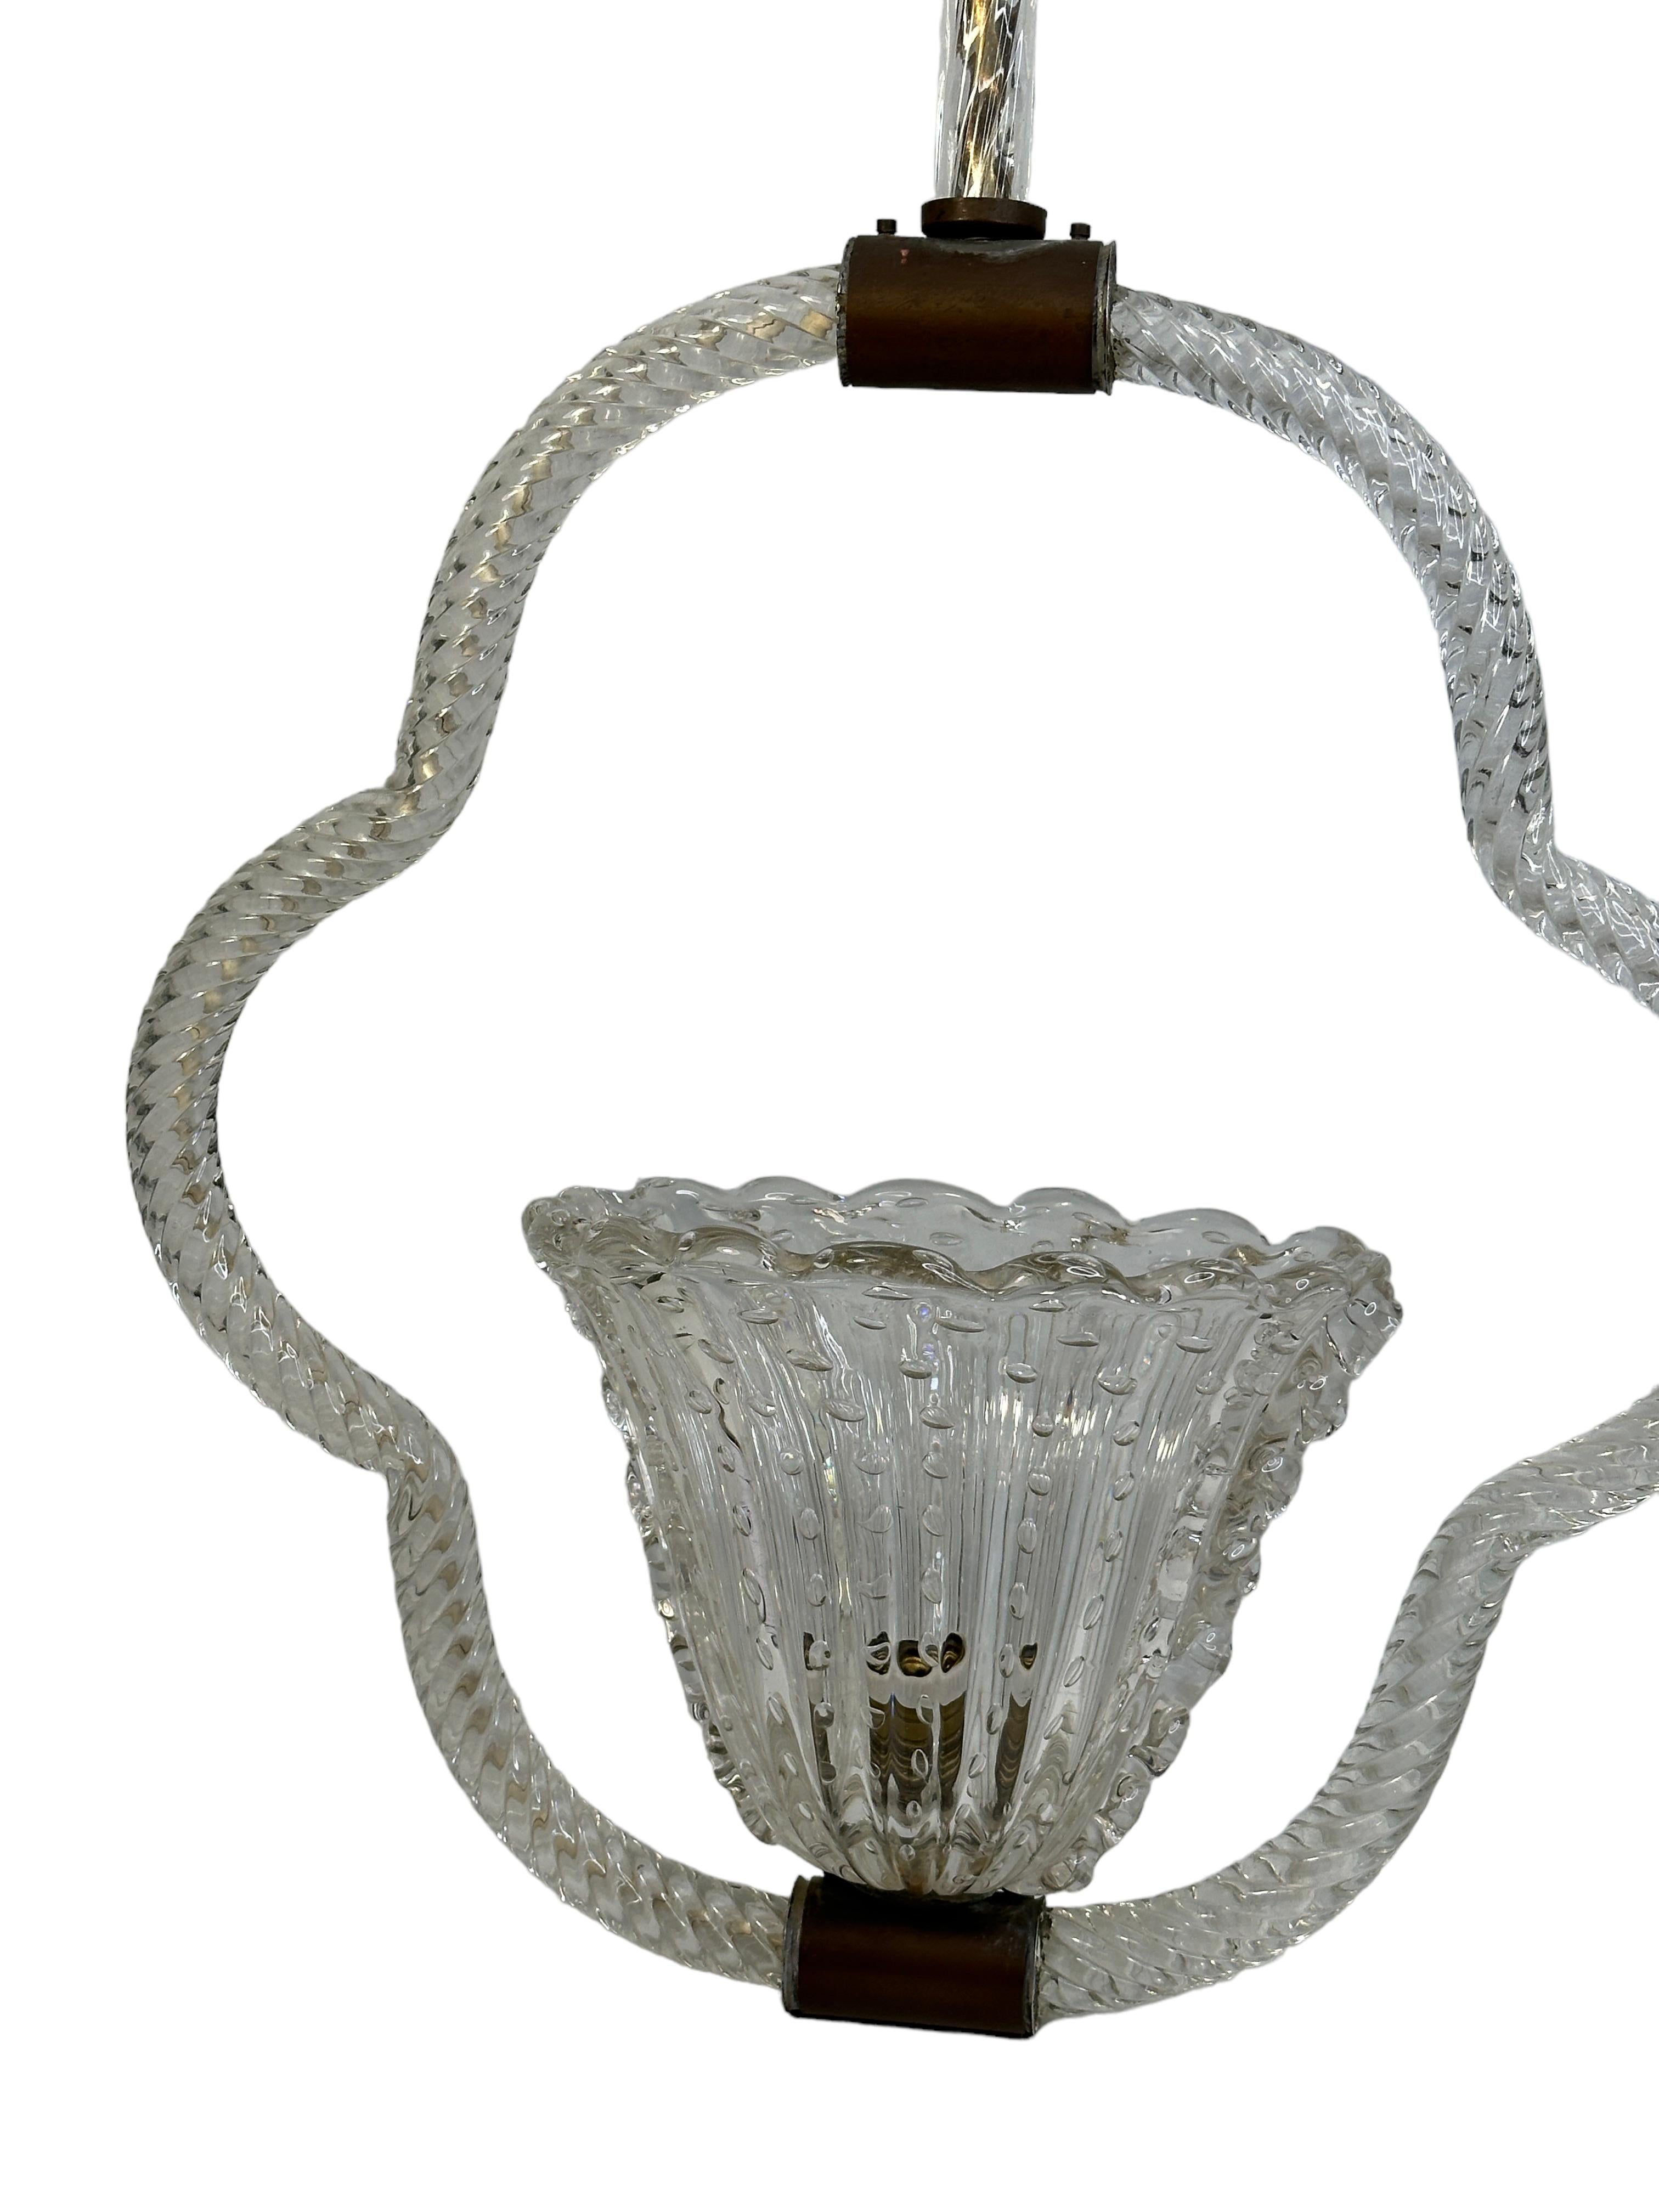 Neoclassical Revival Stunning Large Barovier Toso Pendant Light Chandelier Murano Glass Basket, 1930s For Sale